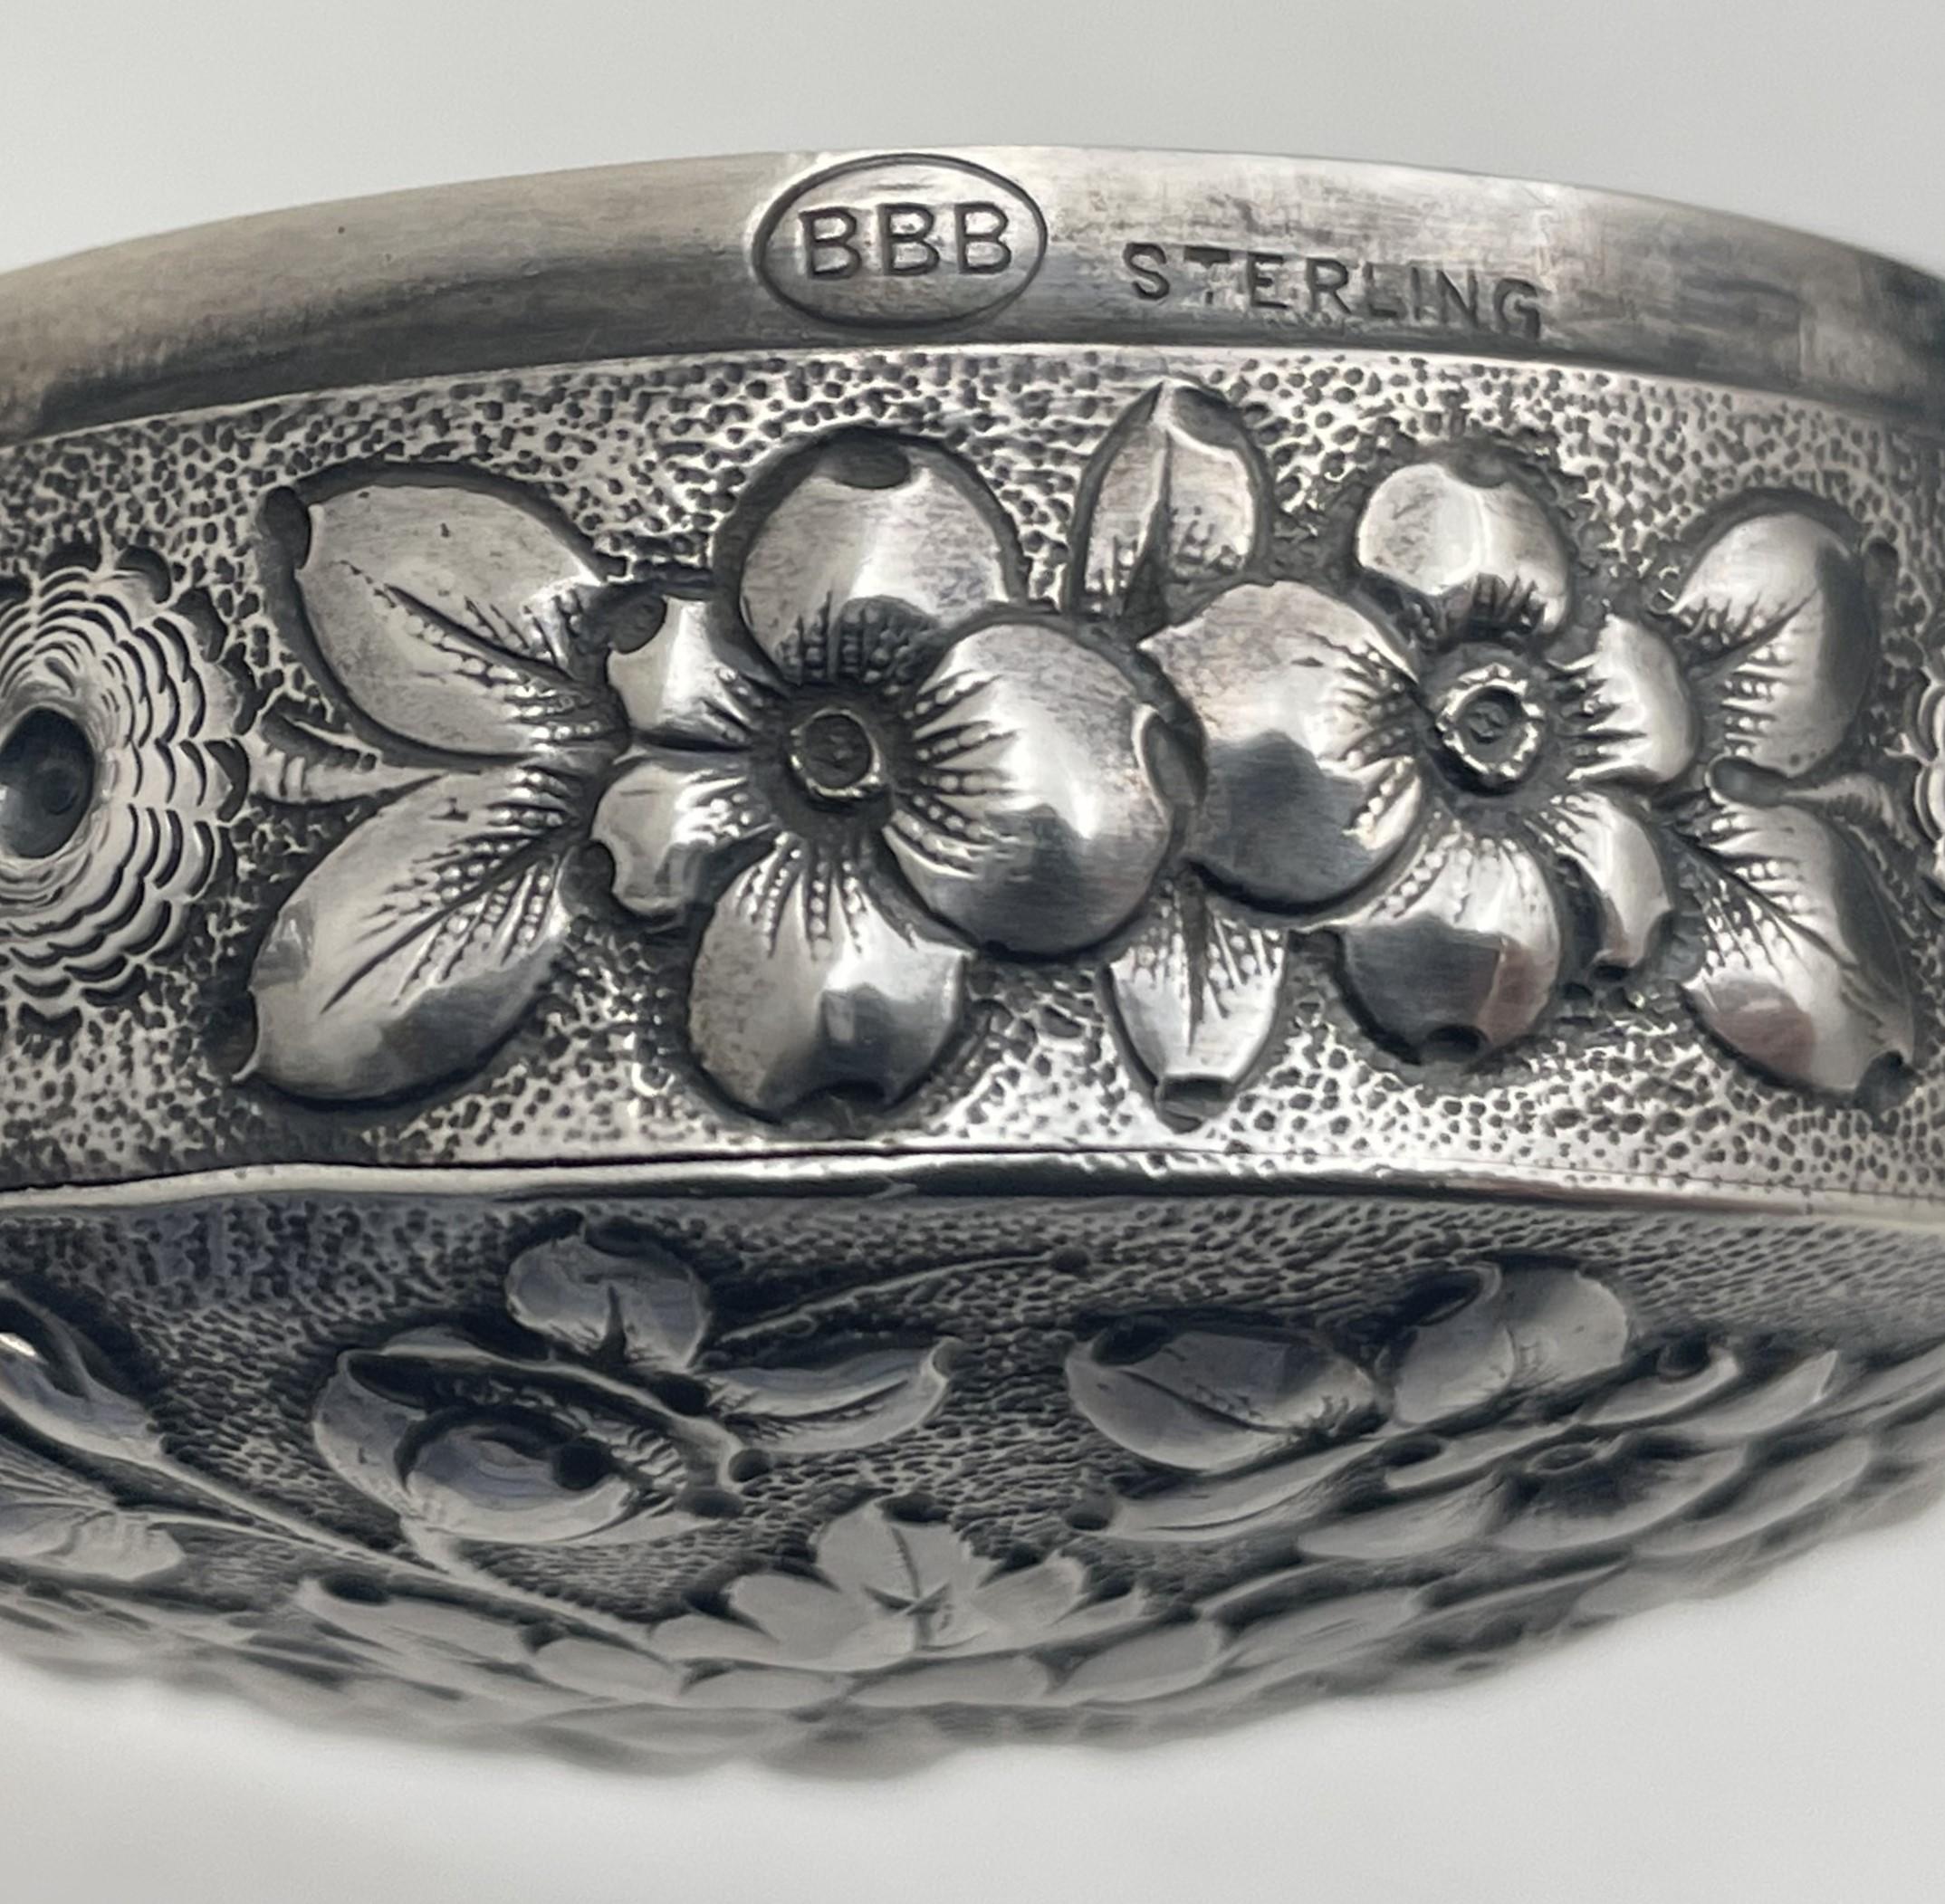 20th Century Dominick & Haff / Bailey, Banks & Biddle Sterling Silver Oval Repousse Snuff Box For Sale